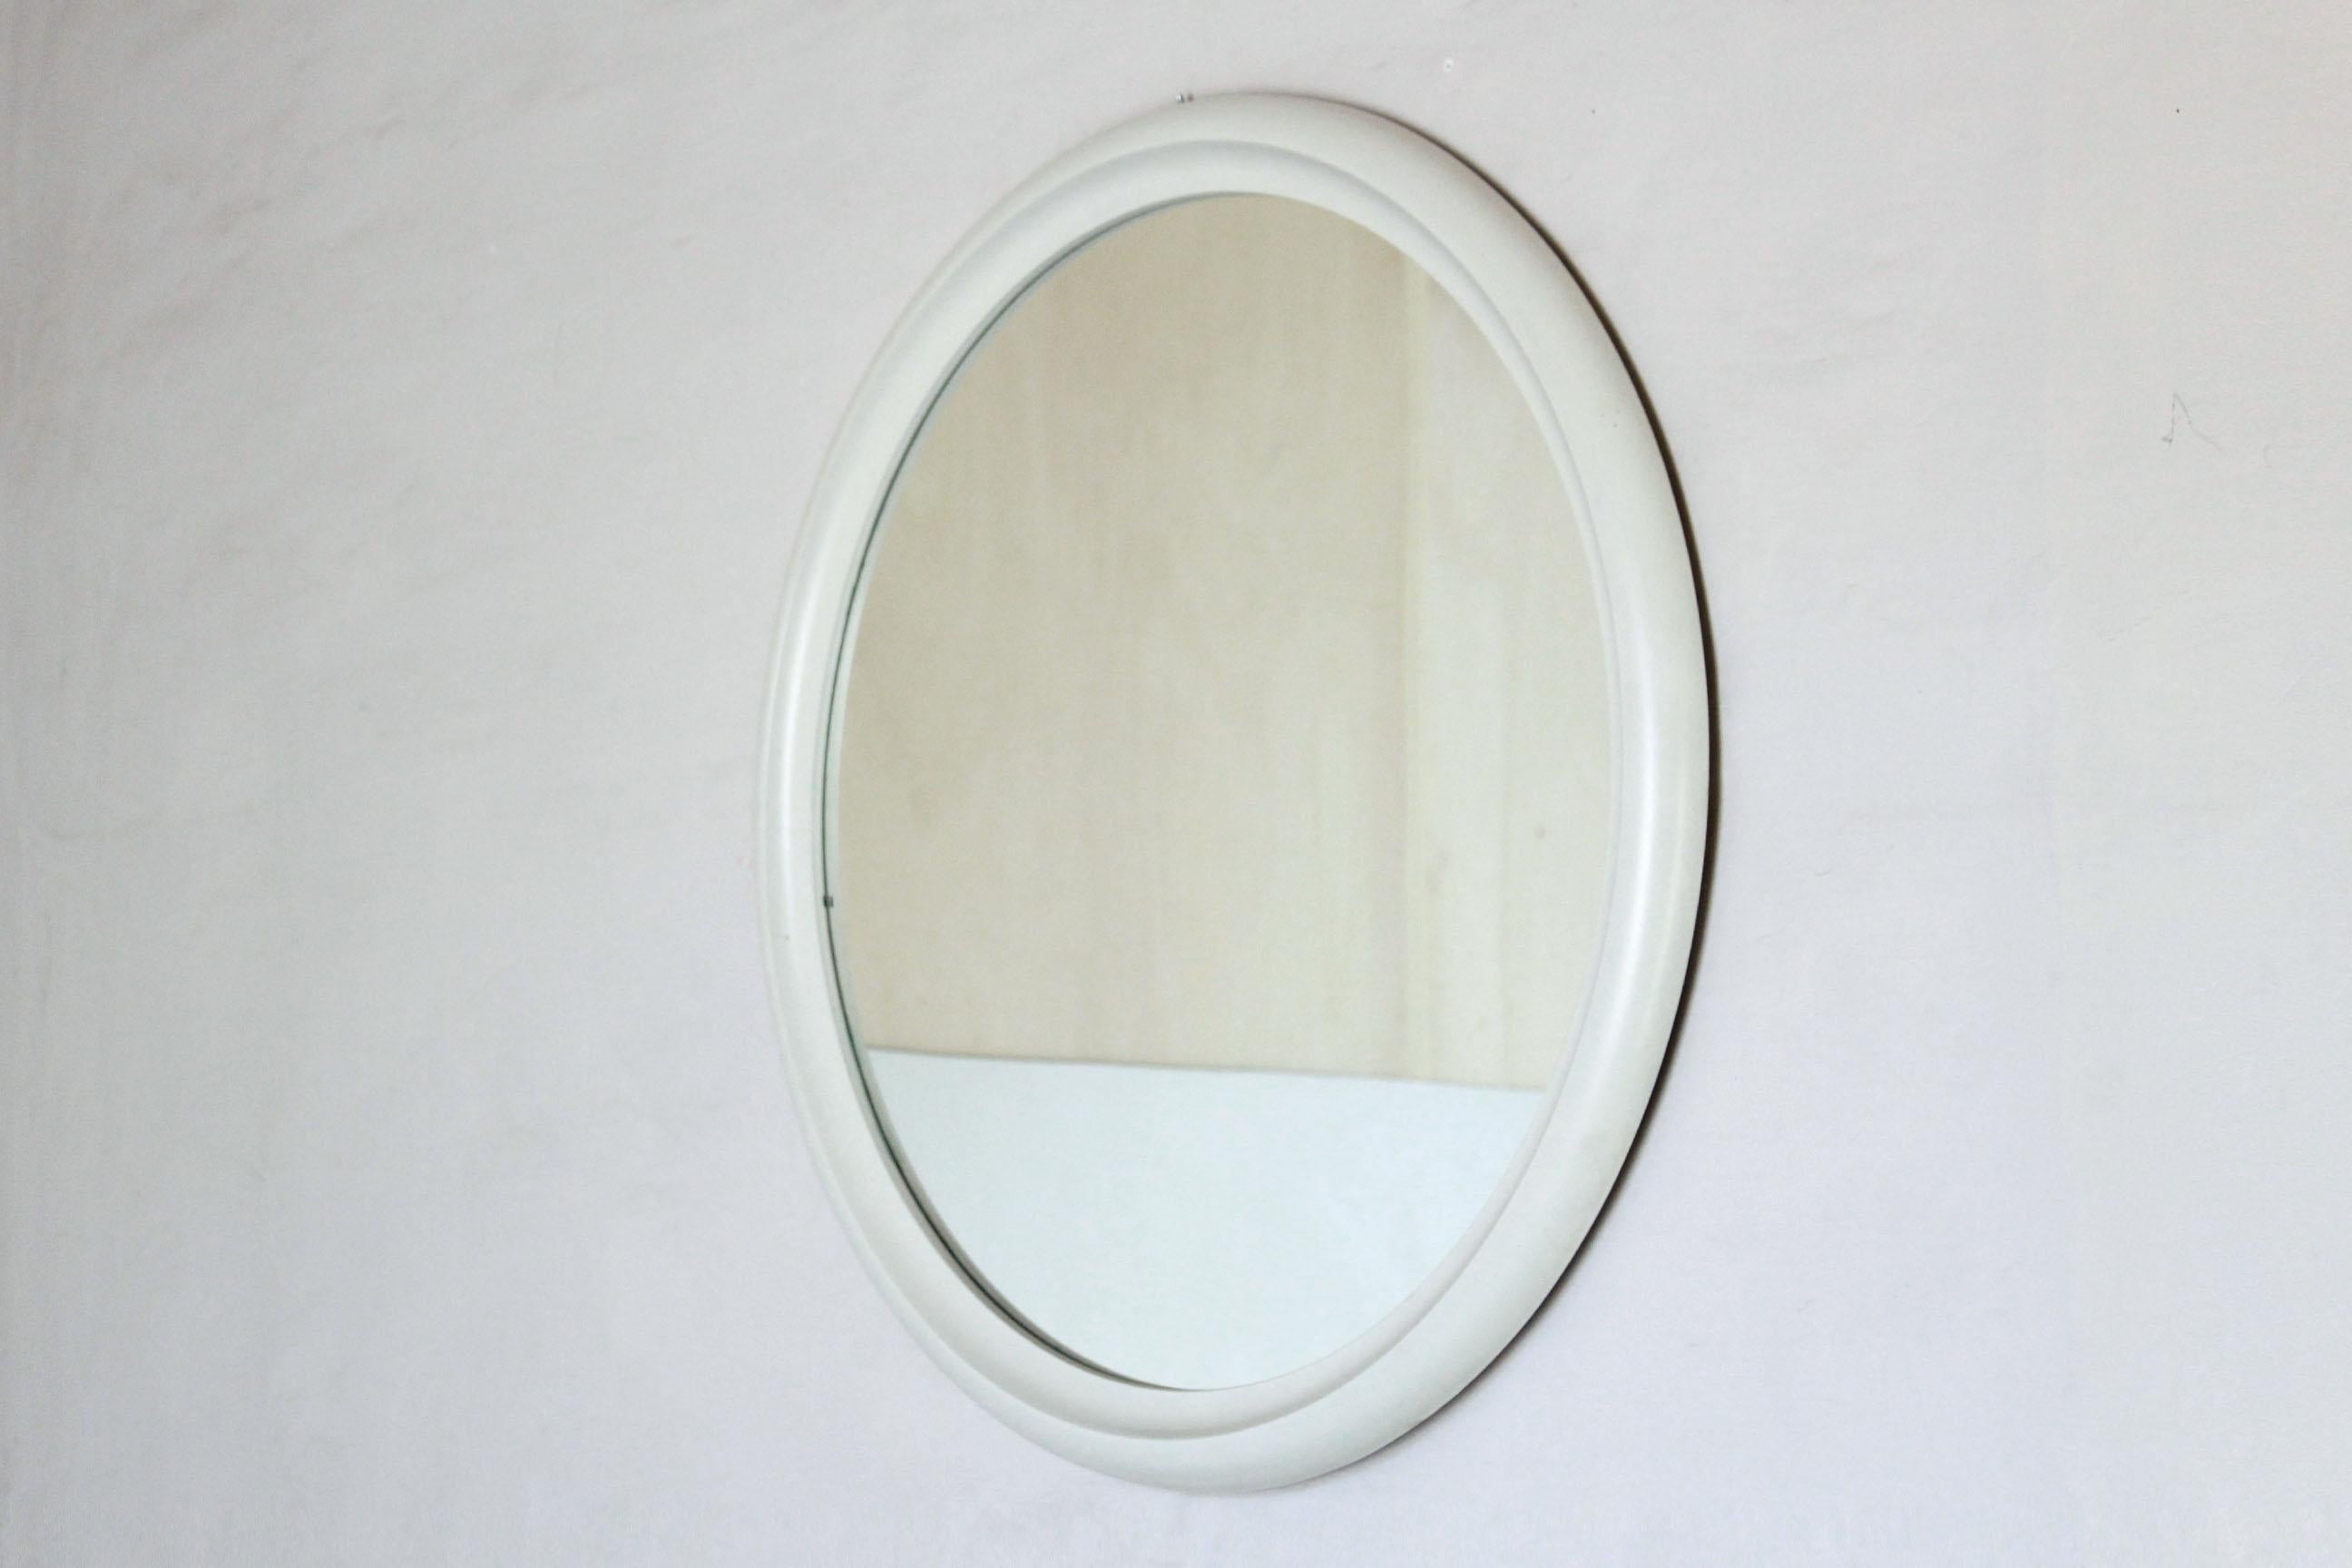 A 1970s vintage round mirror with white lacquered wood frame. In very good conditions with only few signs of time.